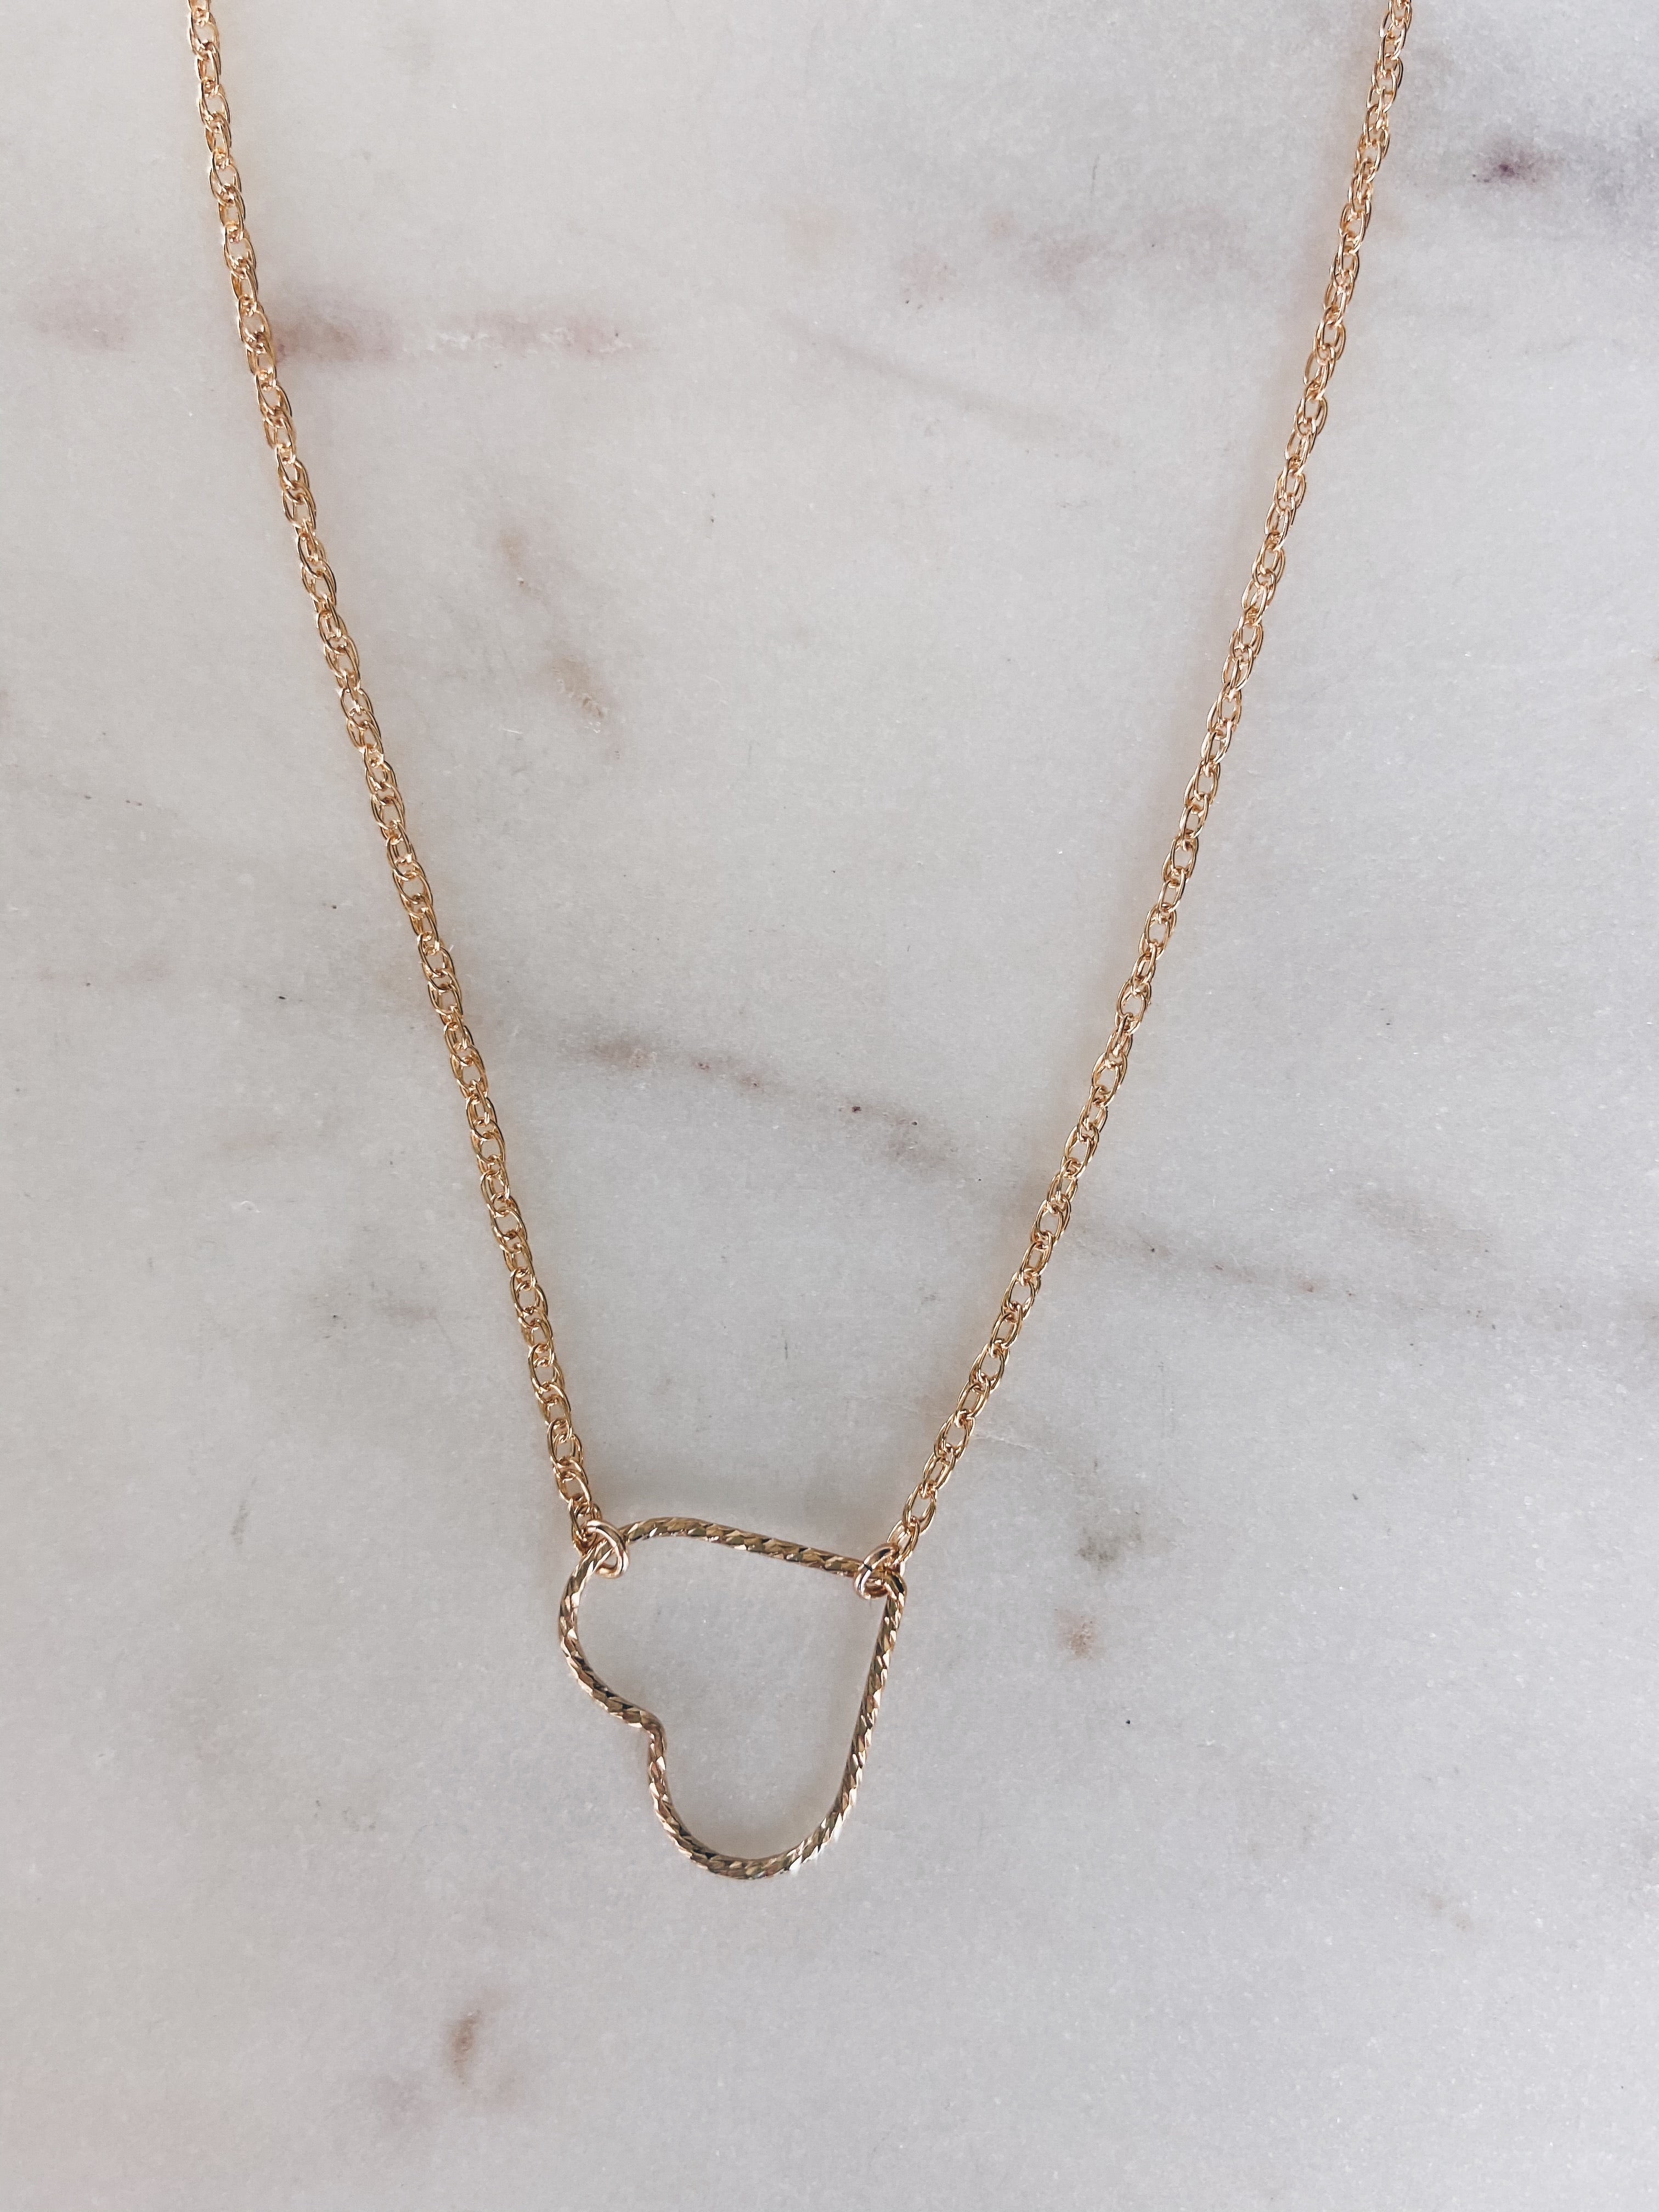 Double Sideways Heart Necklace in 14k Gold Pink Gold and Sterling Silv -  Michelle Chang